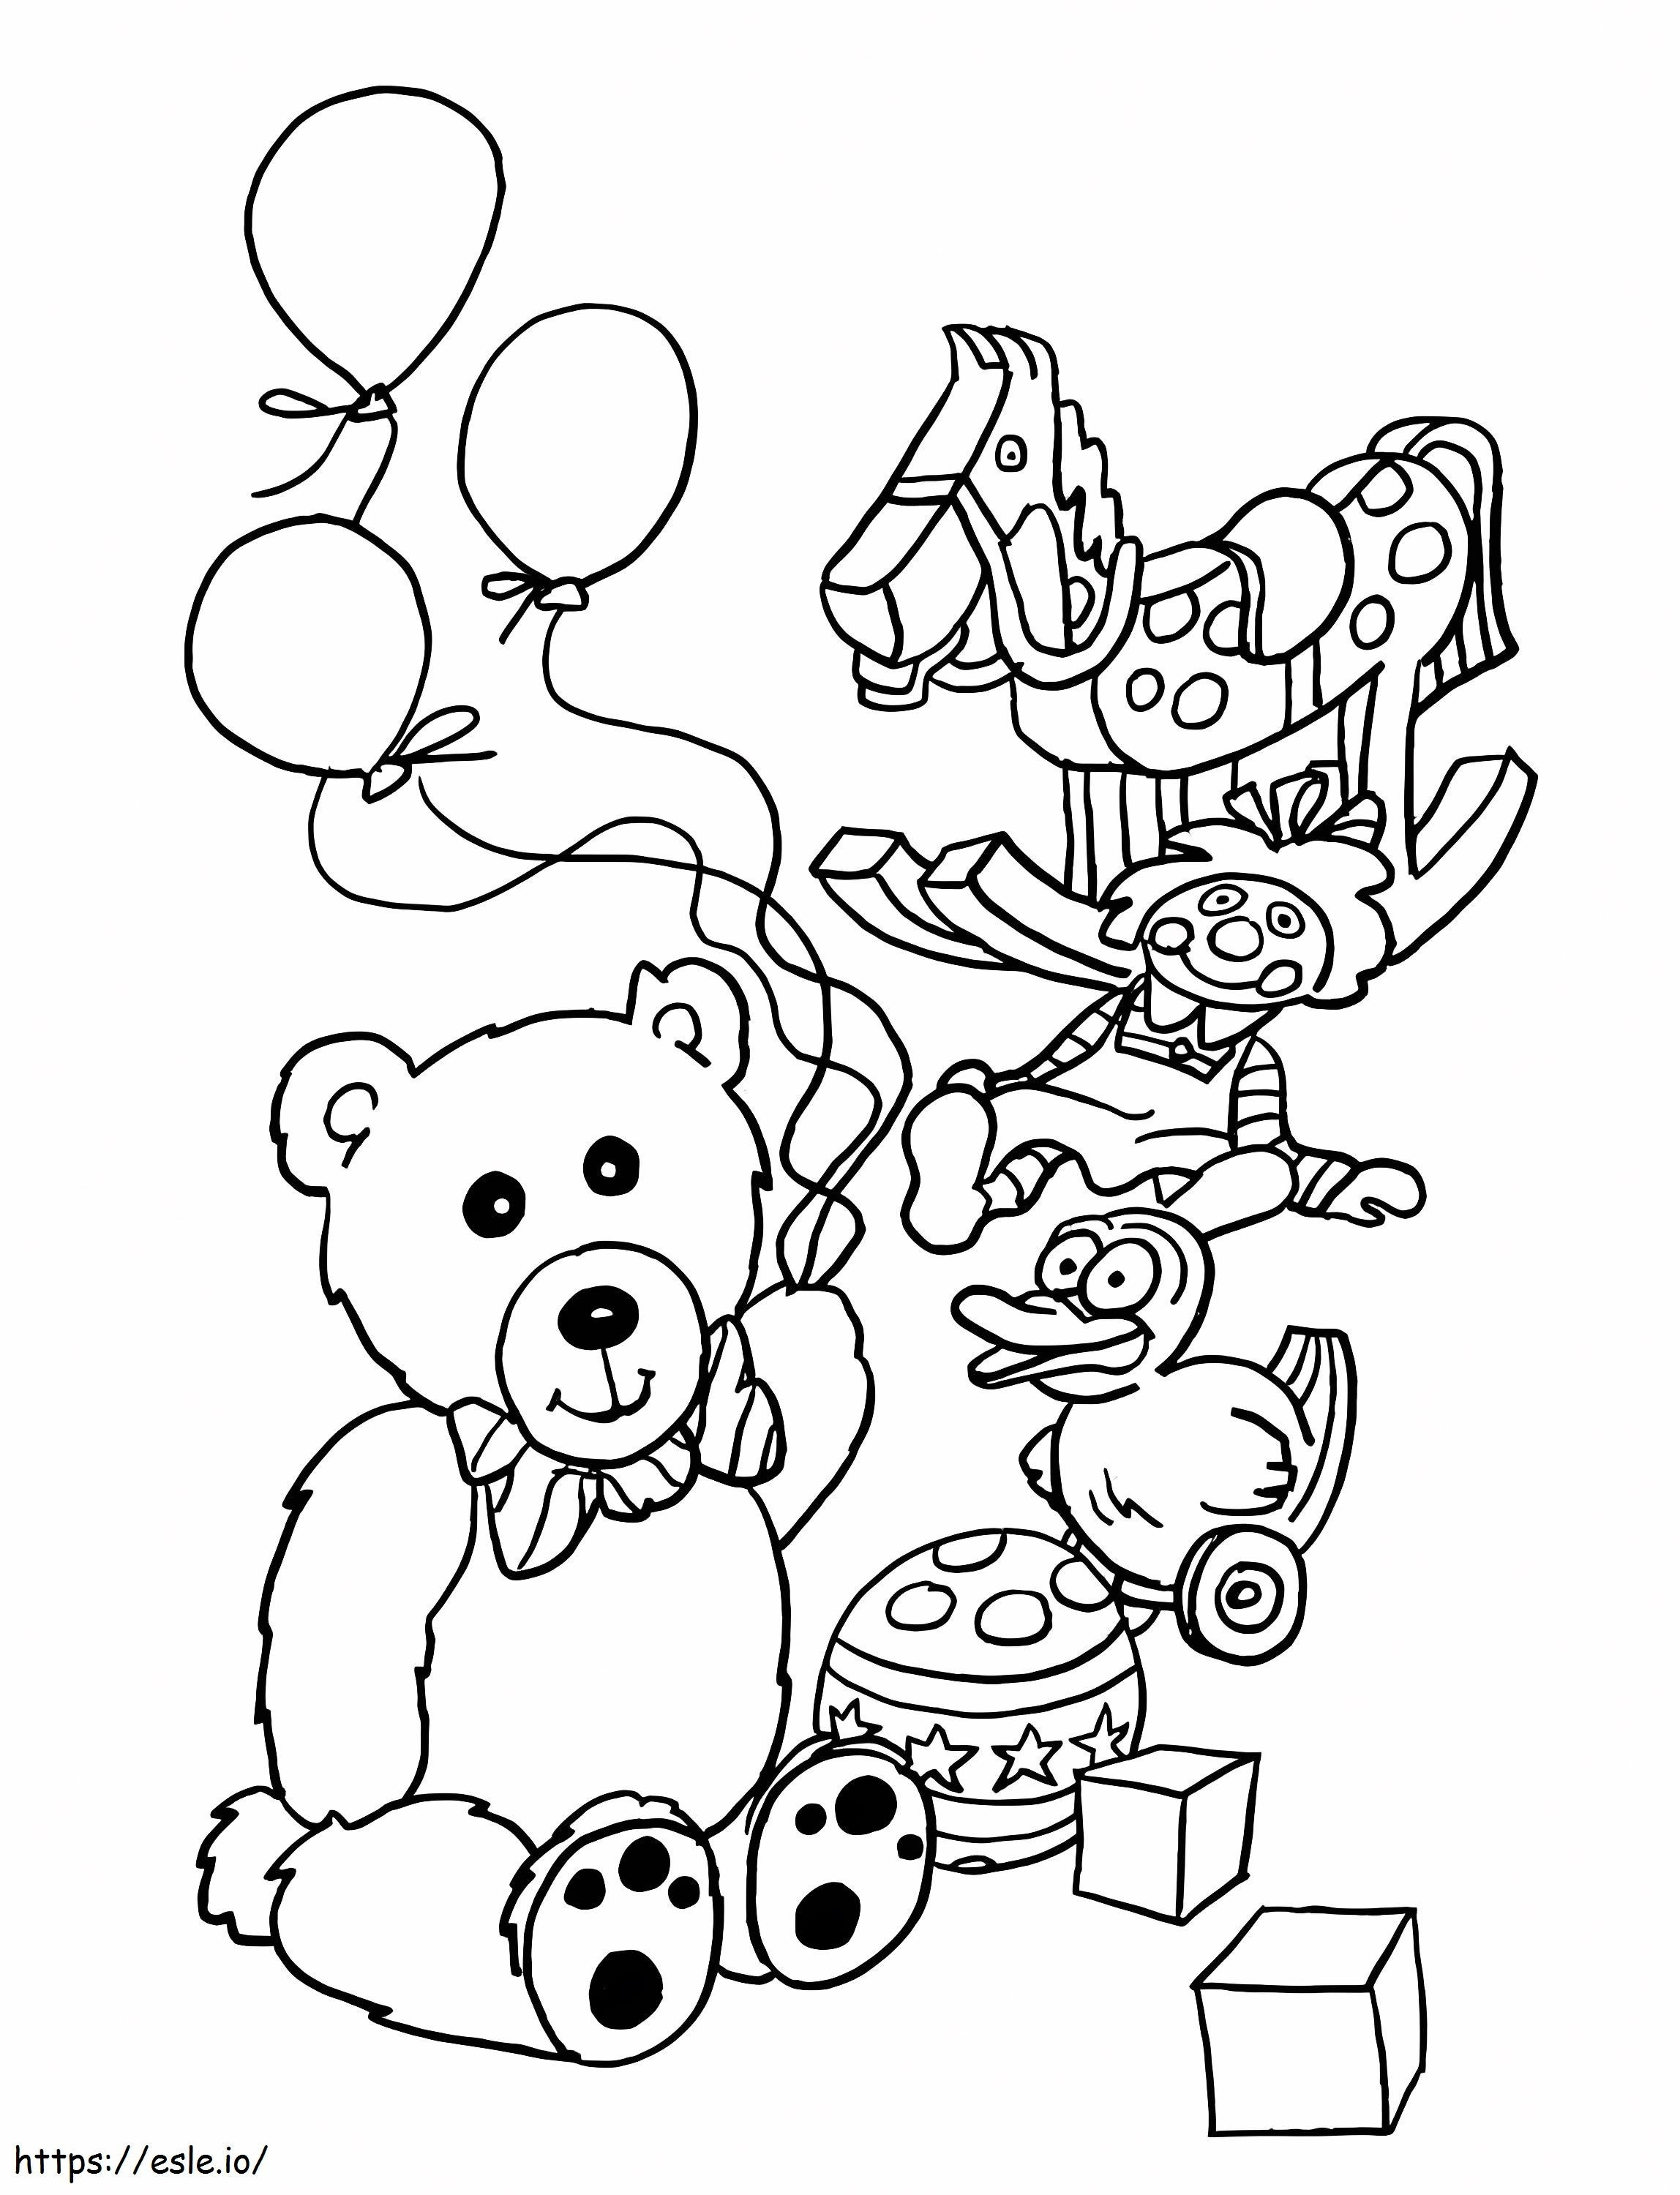 Teddy Bear And Toys coloring page